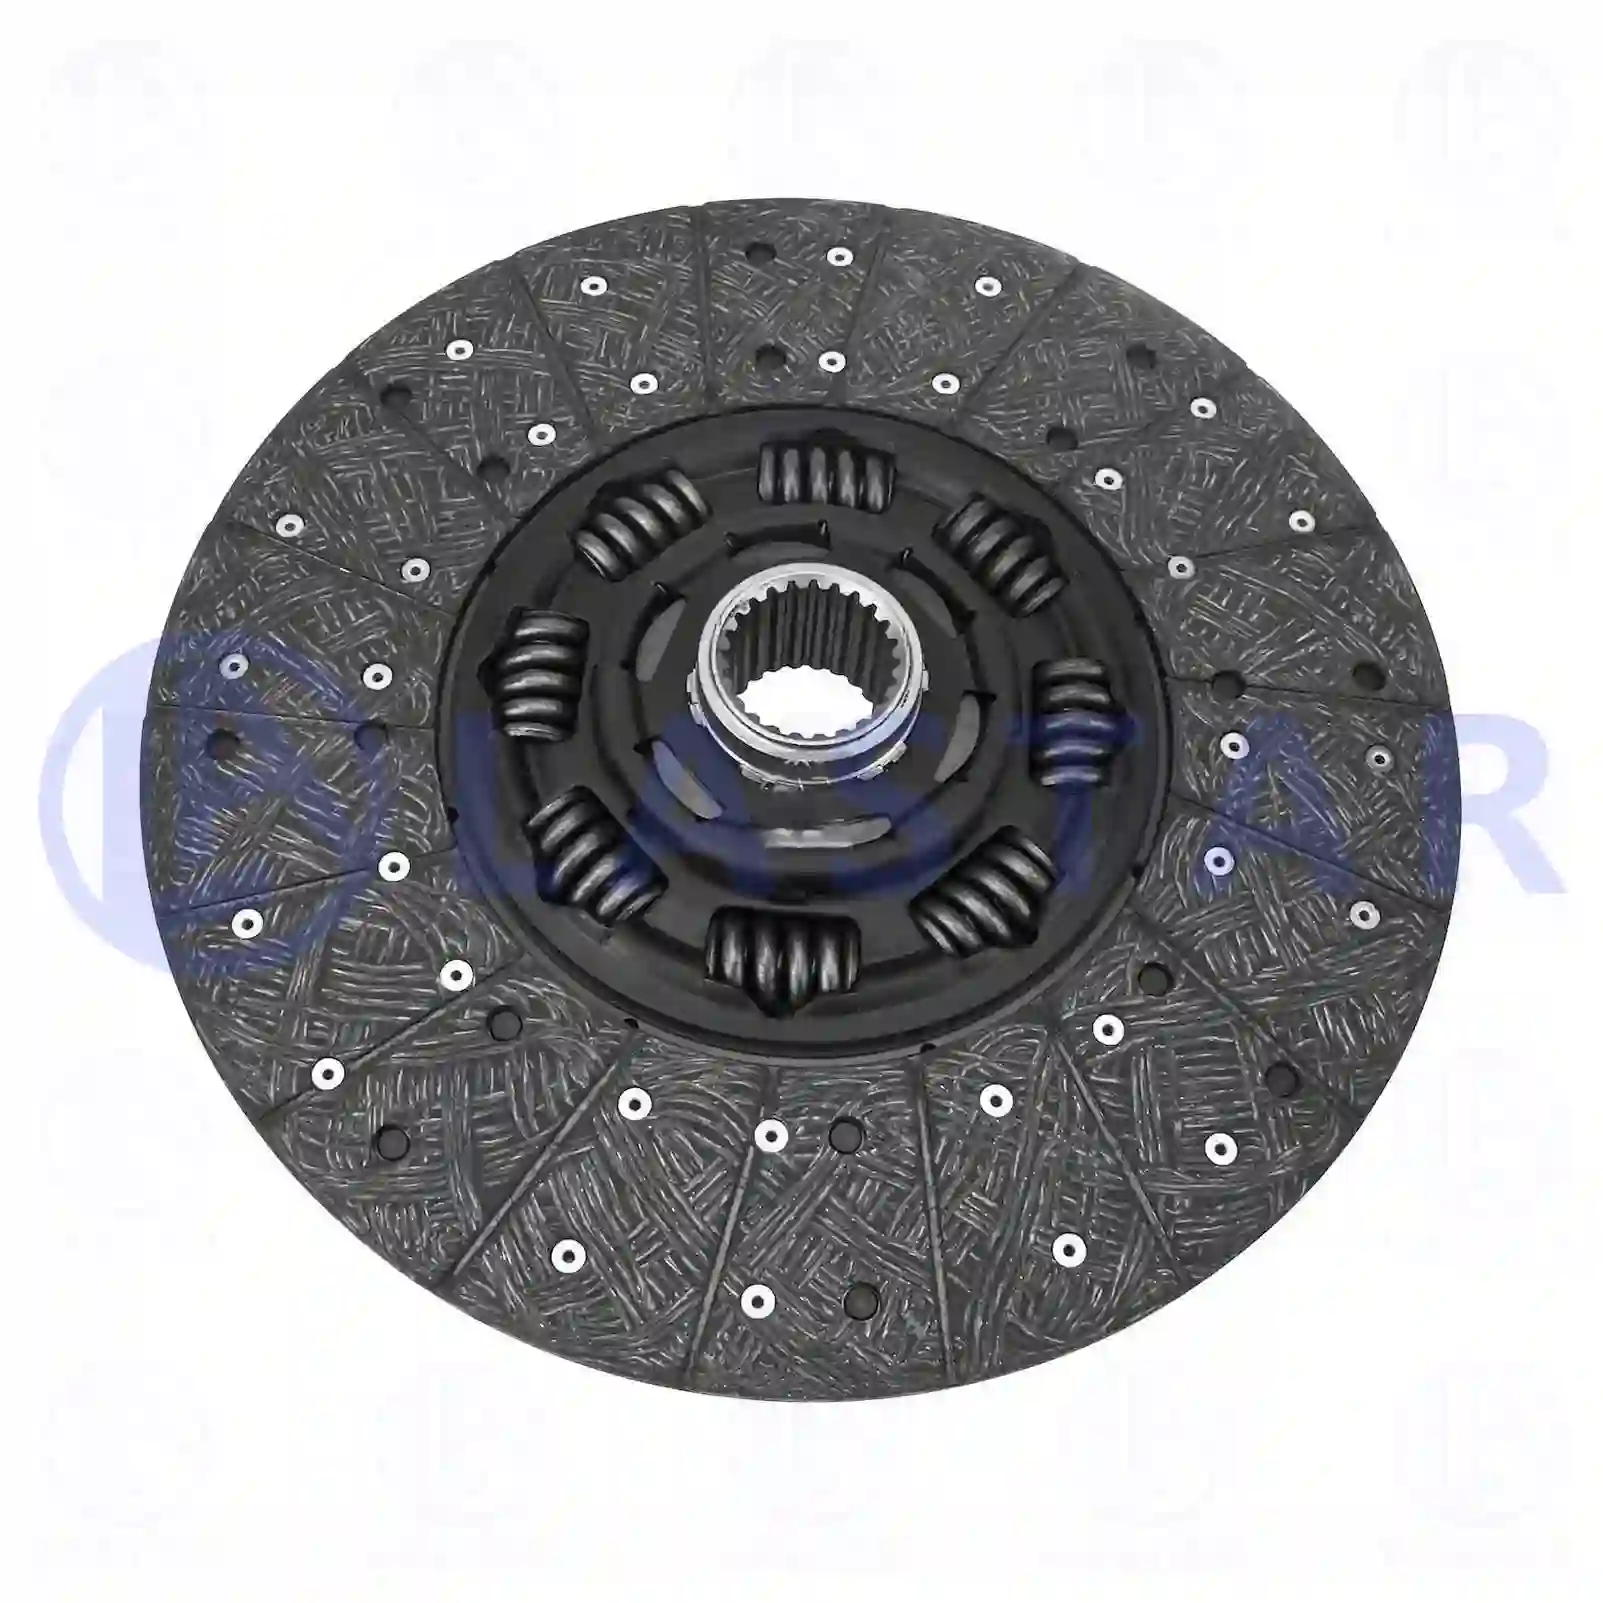 Clutch disc, 77723151, 1349349, 1390374, 1413177, 571224, 571291, 571296, 10571291, 1349349, 1390374, 1413177, 1571224, 1571291, 1571296, 571224, 571291, 571296, ZG30293-0008 ||  77723151 Lastar Spare Part | Truck Spare Parts, Auotomotive Spare Parts Clutch disc, 77723151, 1349349, 1390374, 1413177, 571224, 571291, 571296, 10571291, 1349349, 1390374, 1413177, 1571224, 1571291, 1571296, 571224, 571291, 571296, ZG30293-0008 ||  77723151 Lastar Spare Part | Truck Spare Parts, Auotomotive Spare Parts